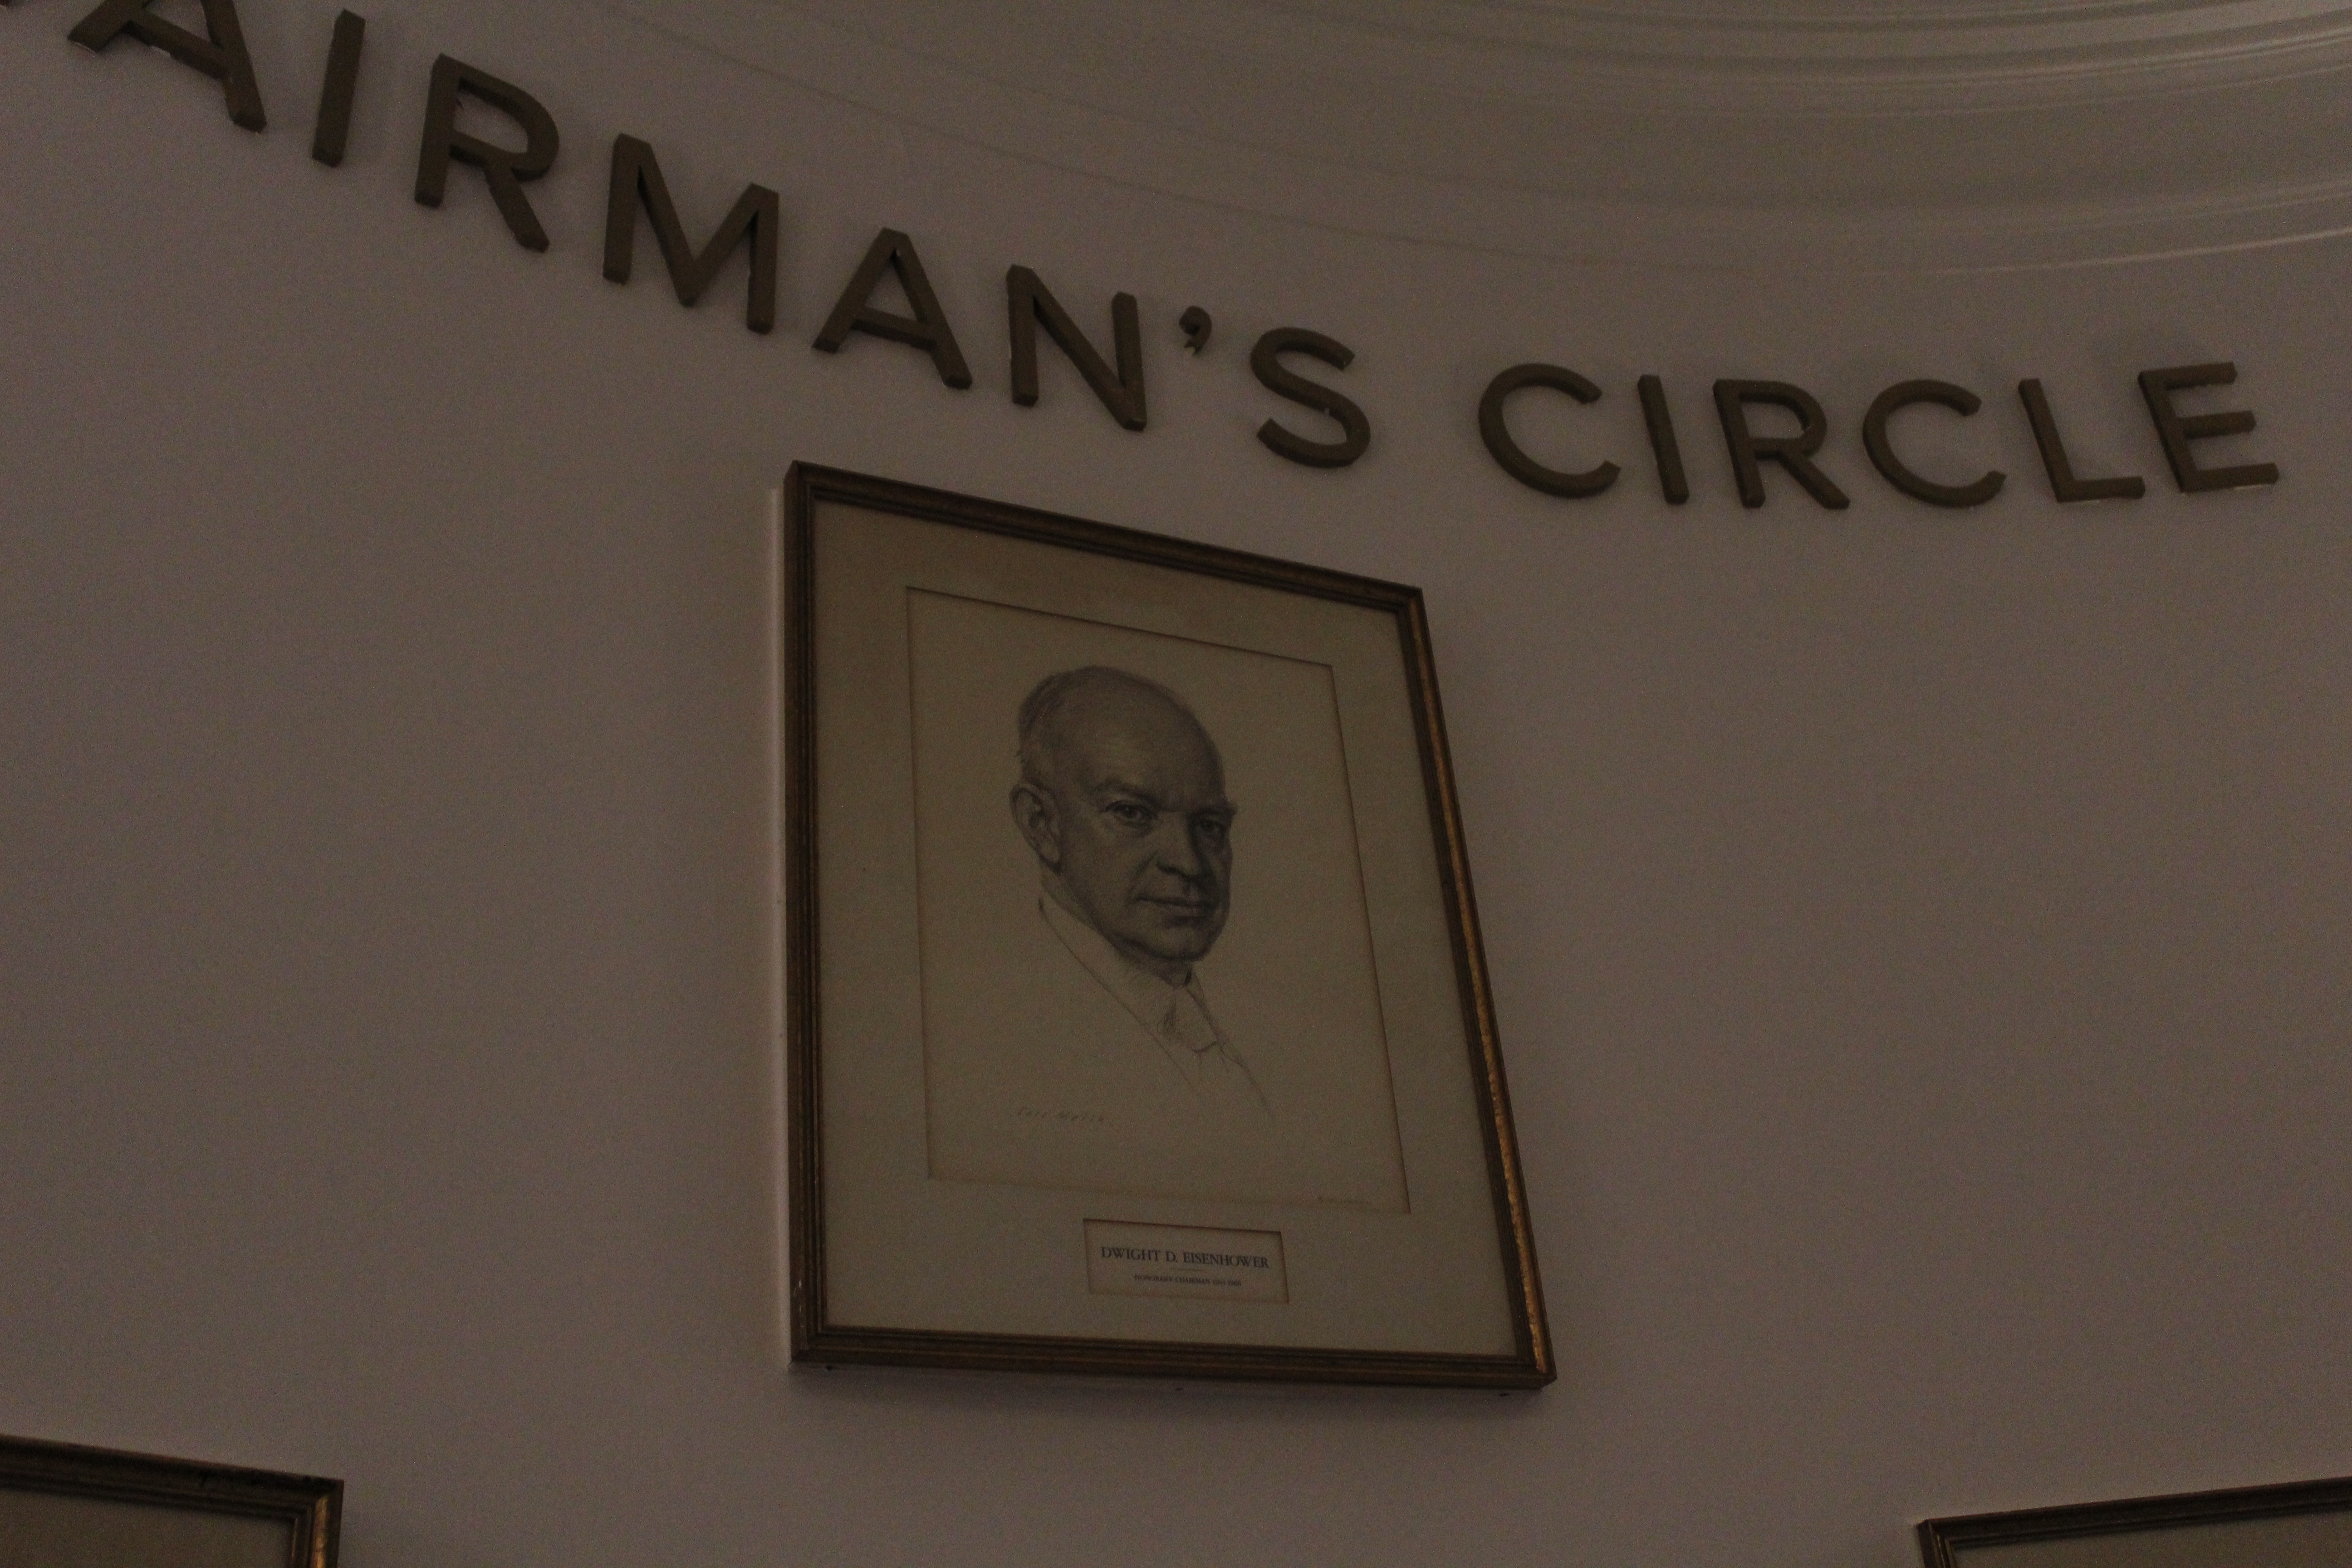 A portrait of Dwight Eisenhower under a sign of "Chairman's Circle"